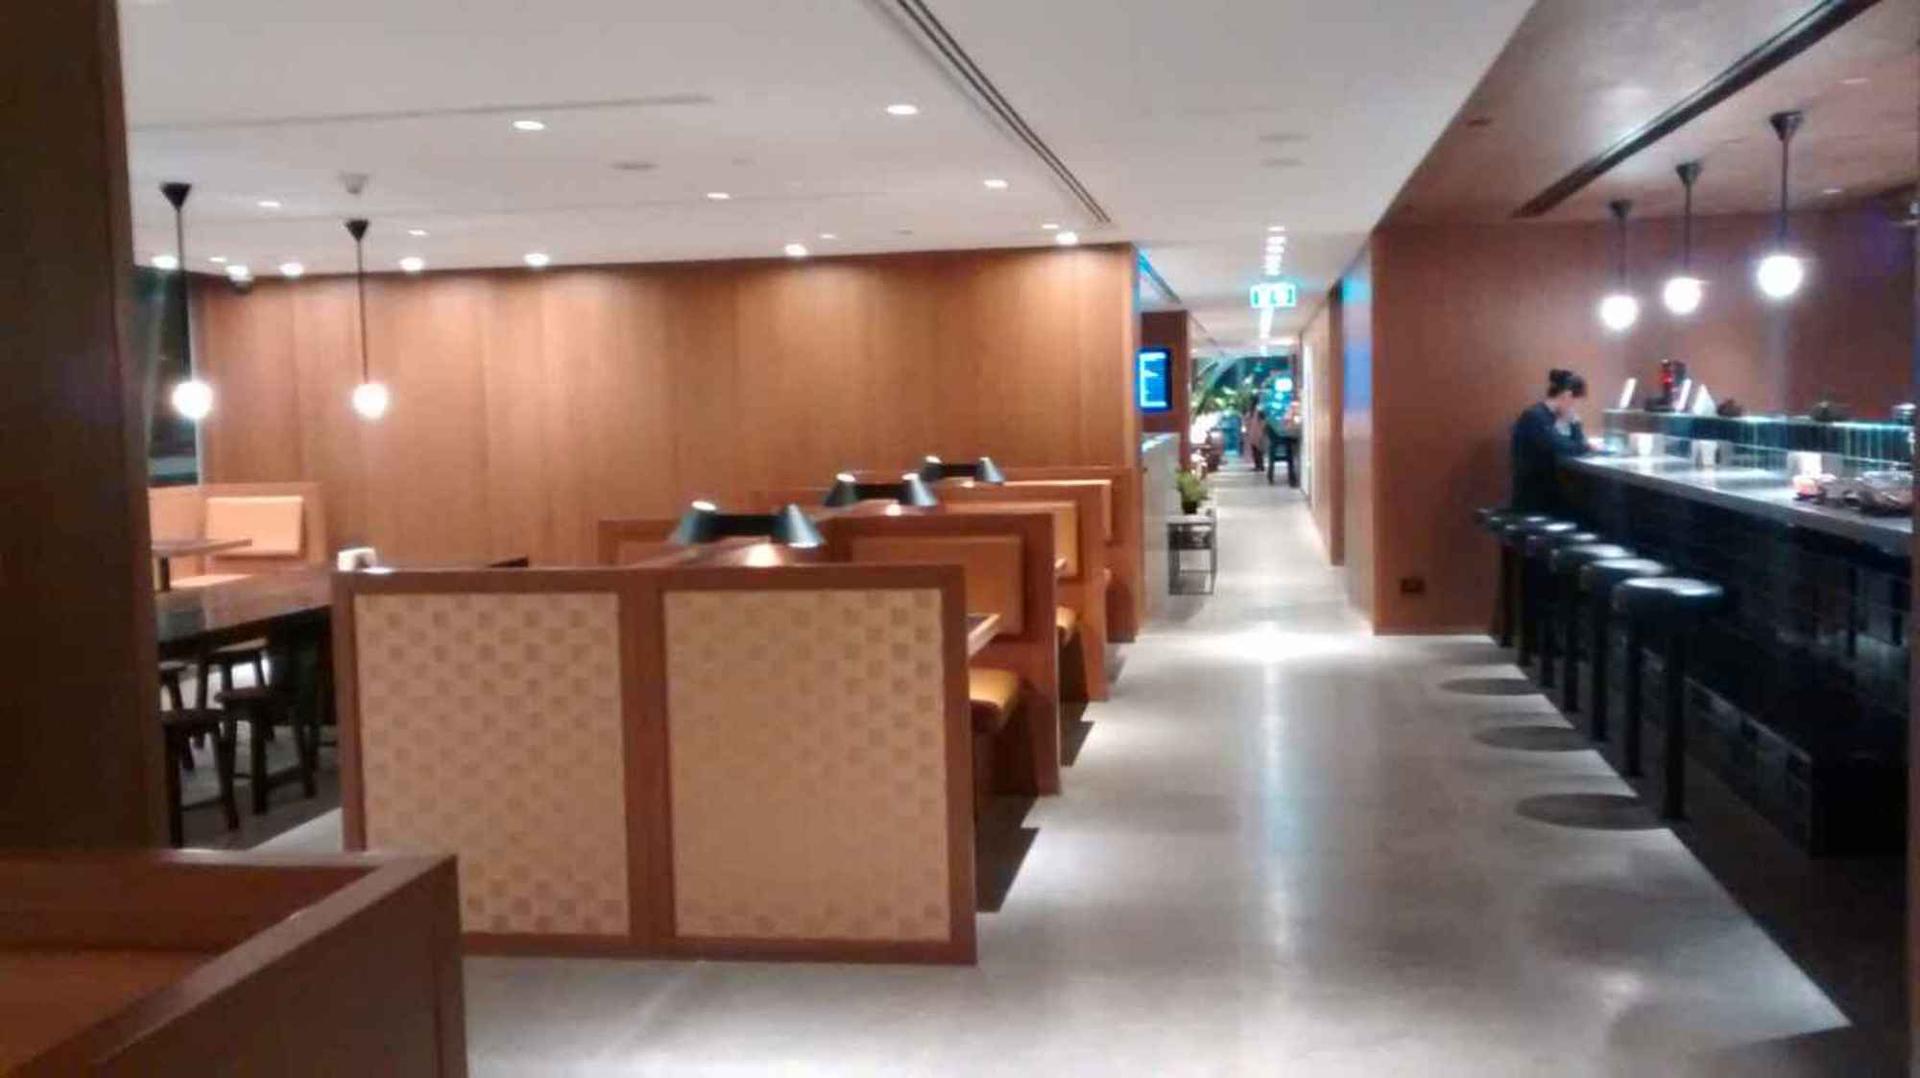 Cathay Pacific First and Business Class Lounge image 14 of 69